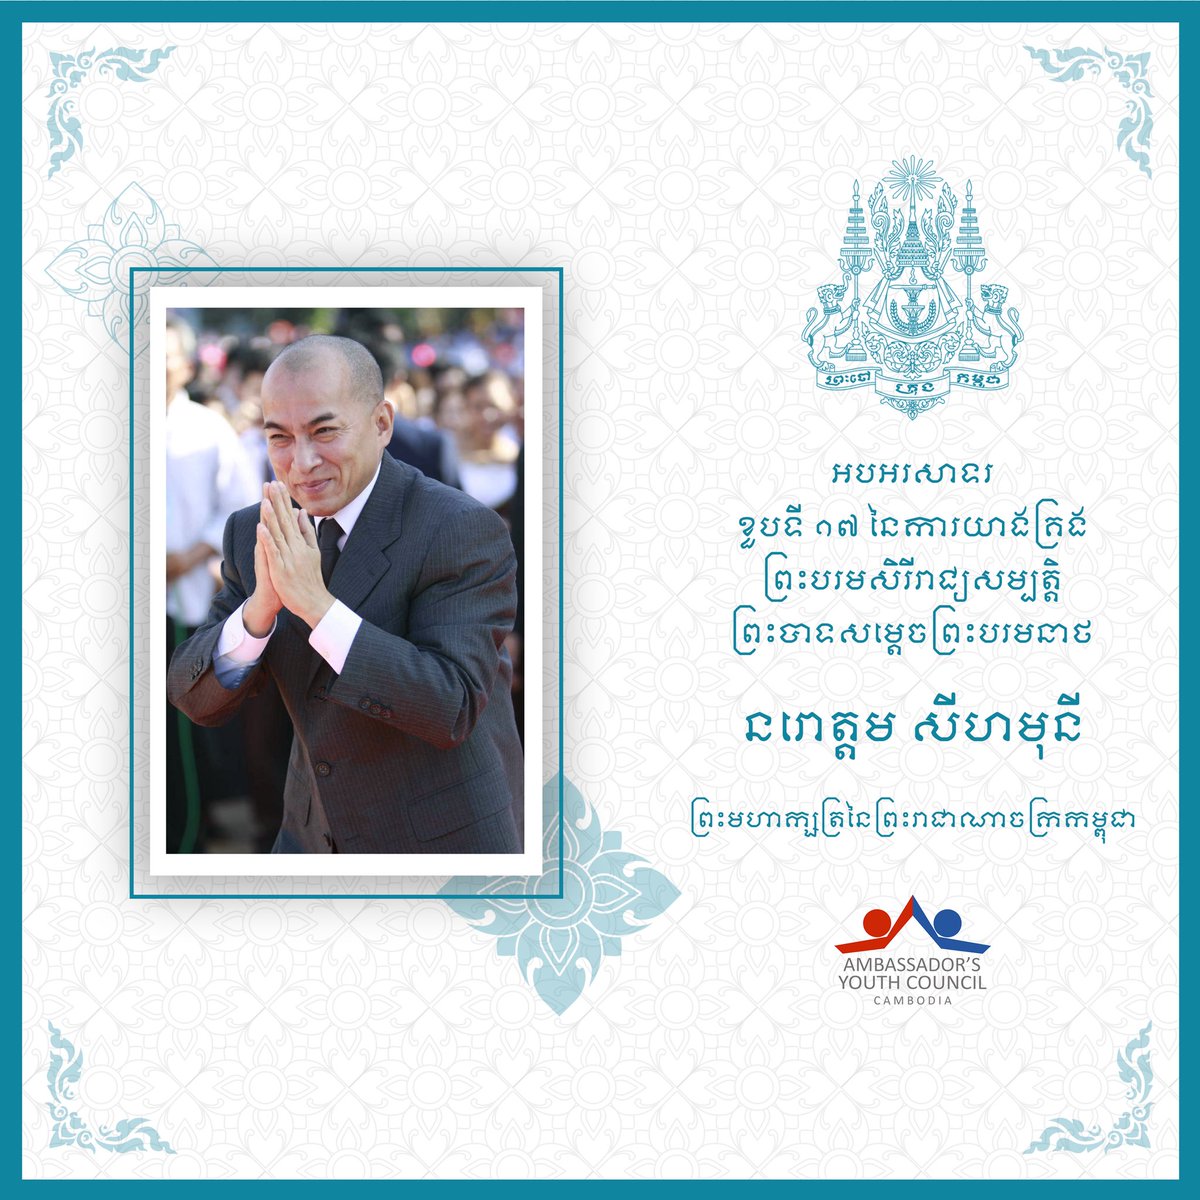 On the auspicious occasion of the 17th anniversary of His Majesty Preah Bat Samdech Preah Boromneath Norodom Sihamoni's coronation, the USAYCkh members extends our most sincere and heartfelt felicitations for His Majesty's good health, great happiness, wisdom and longevity.